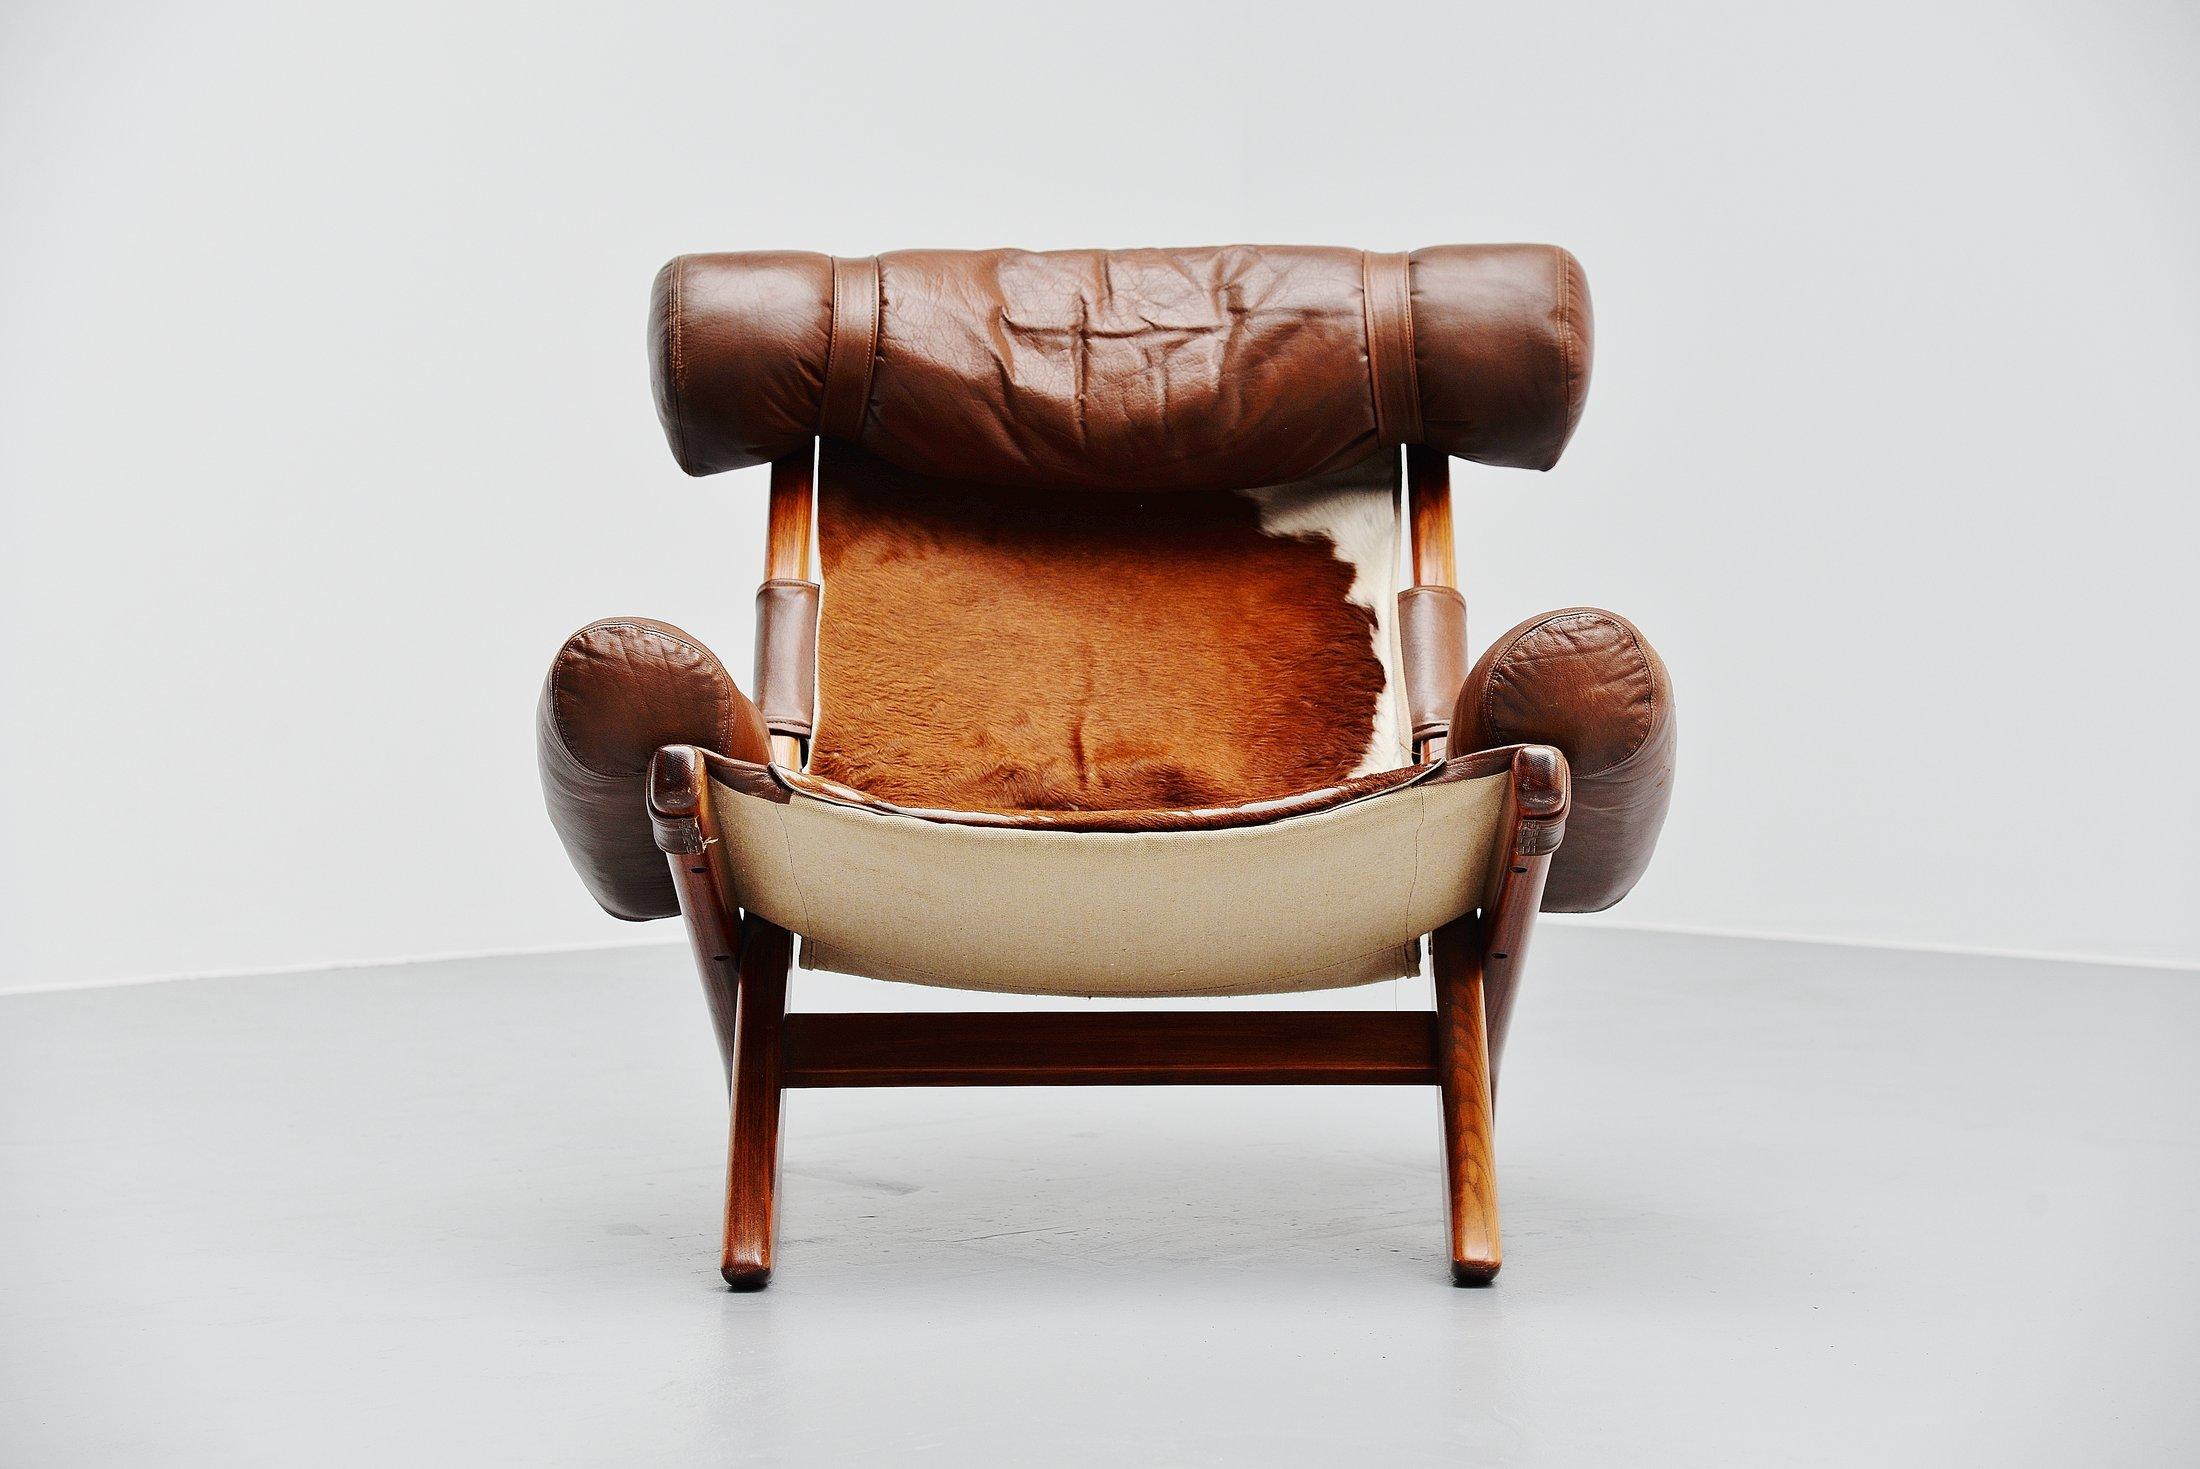 Very nice and unusual 'Ox' lounge chair attributed to Sergio Rodrigues, Brazil, 1960. The chair is made of stained teak wood and has cow skin leather seat supported with a canvas back and with brown leather arm rests and head cushion. The chair is